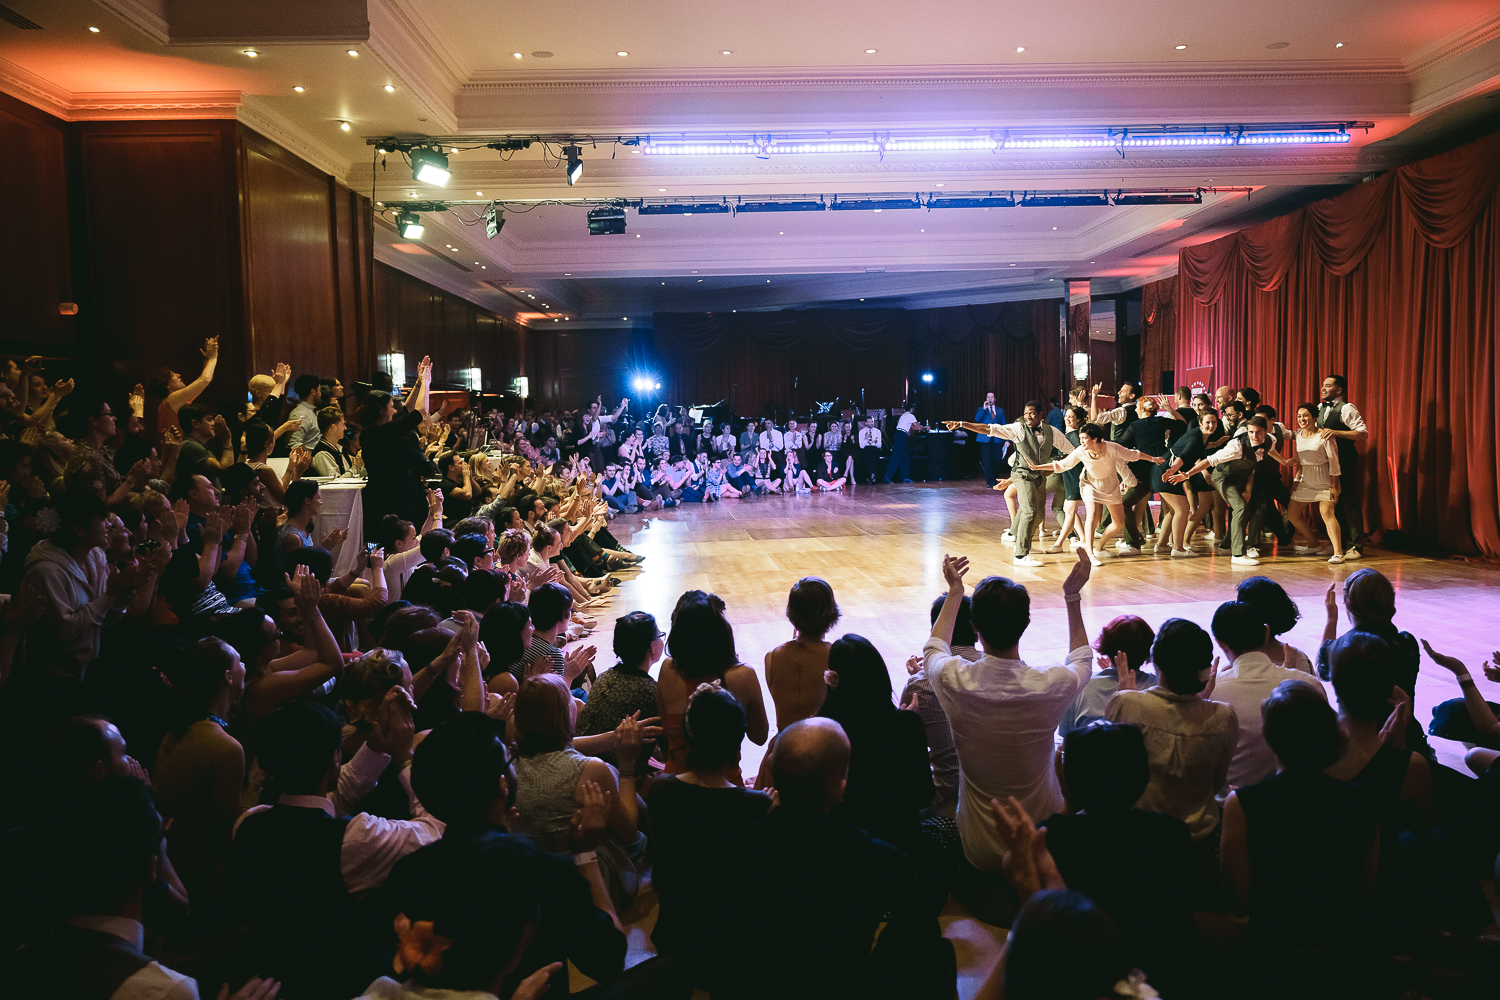  European Swing Dance Championships 2015 - For Dancers Only (http://d.pr/1fEEY) - http://www.ebobrie.com/european-swing-dance-championships-2015 